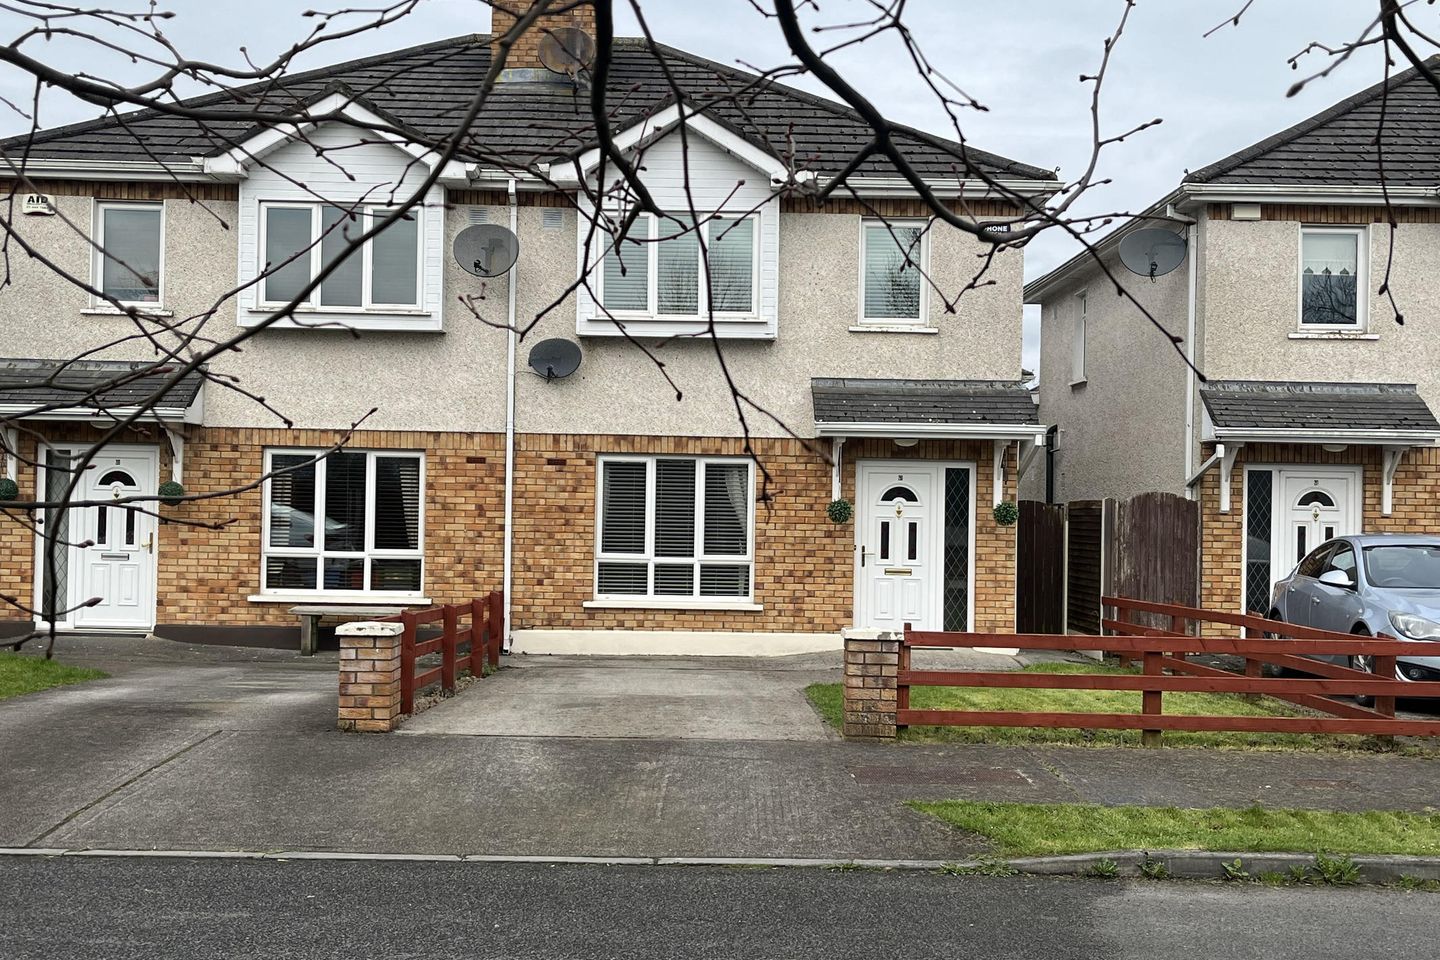 290 The Sycamores, Edenderry, Co. Offaly, R45AE71